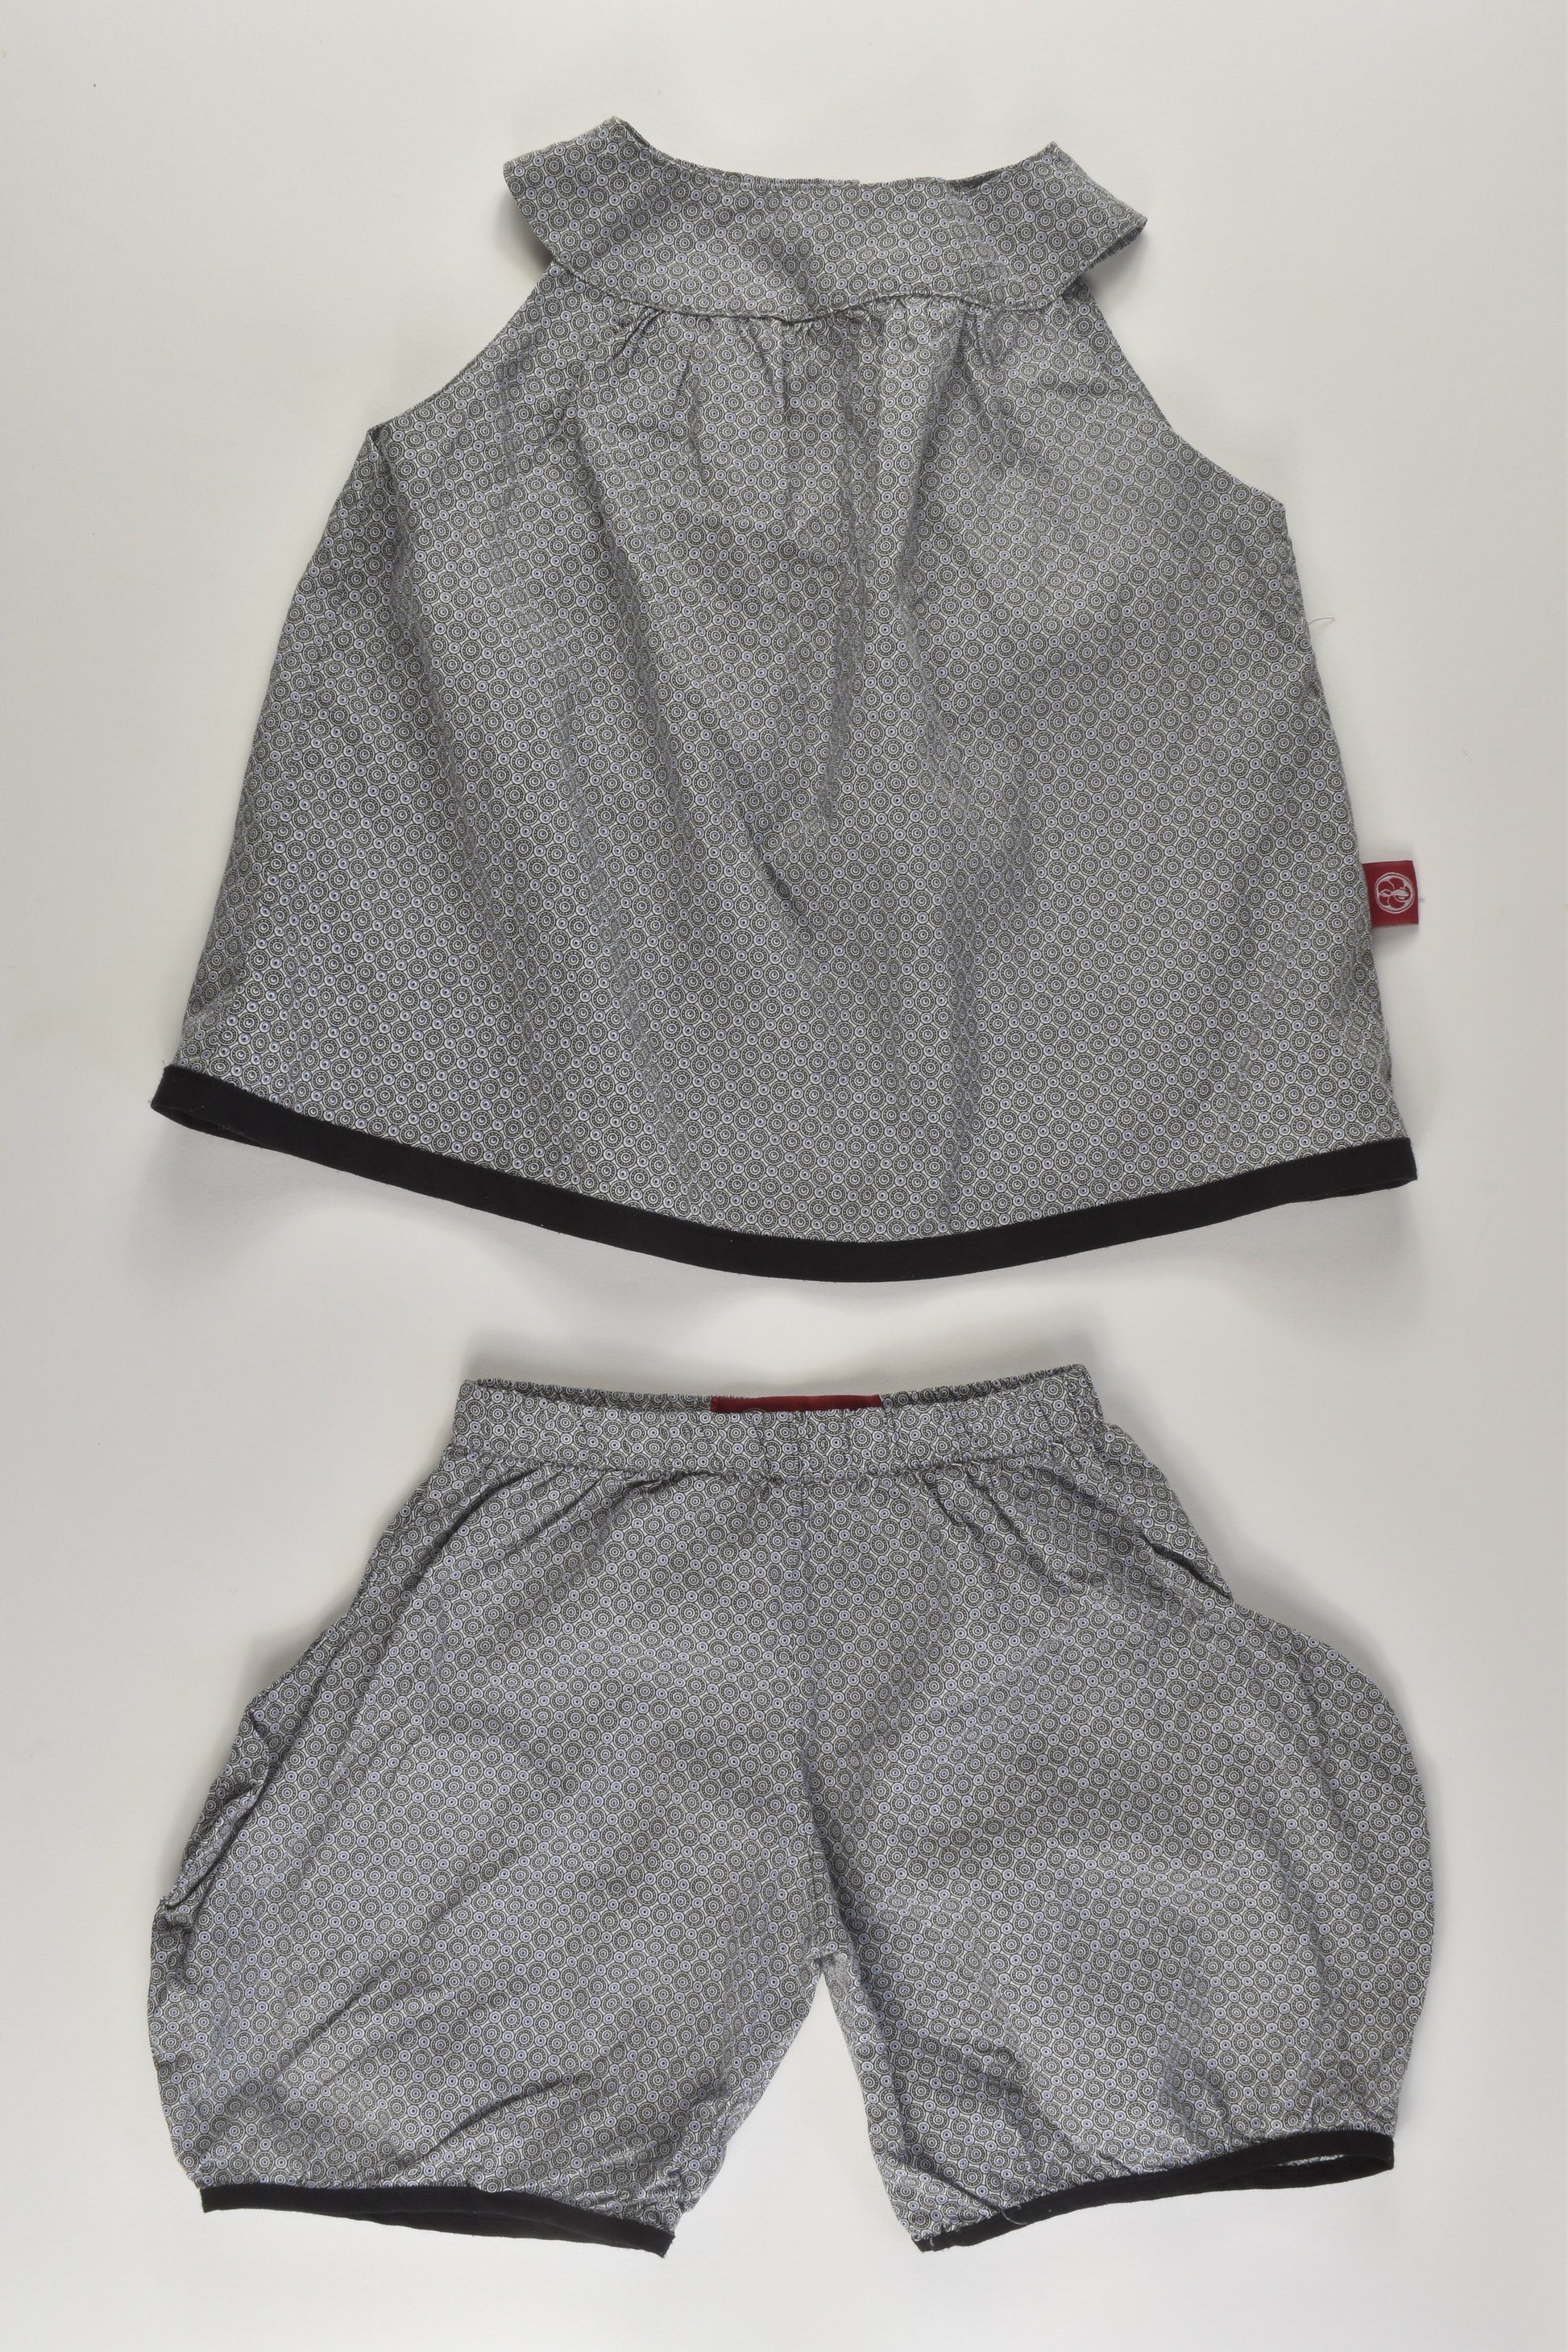 Redfish Kids Size 0-1 (12 months) Outfit